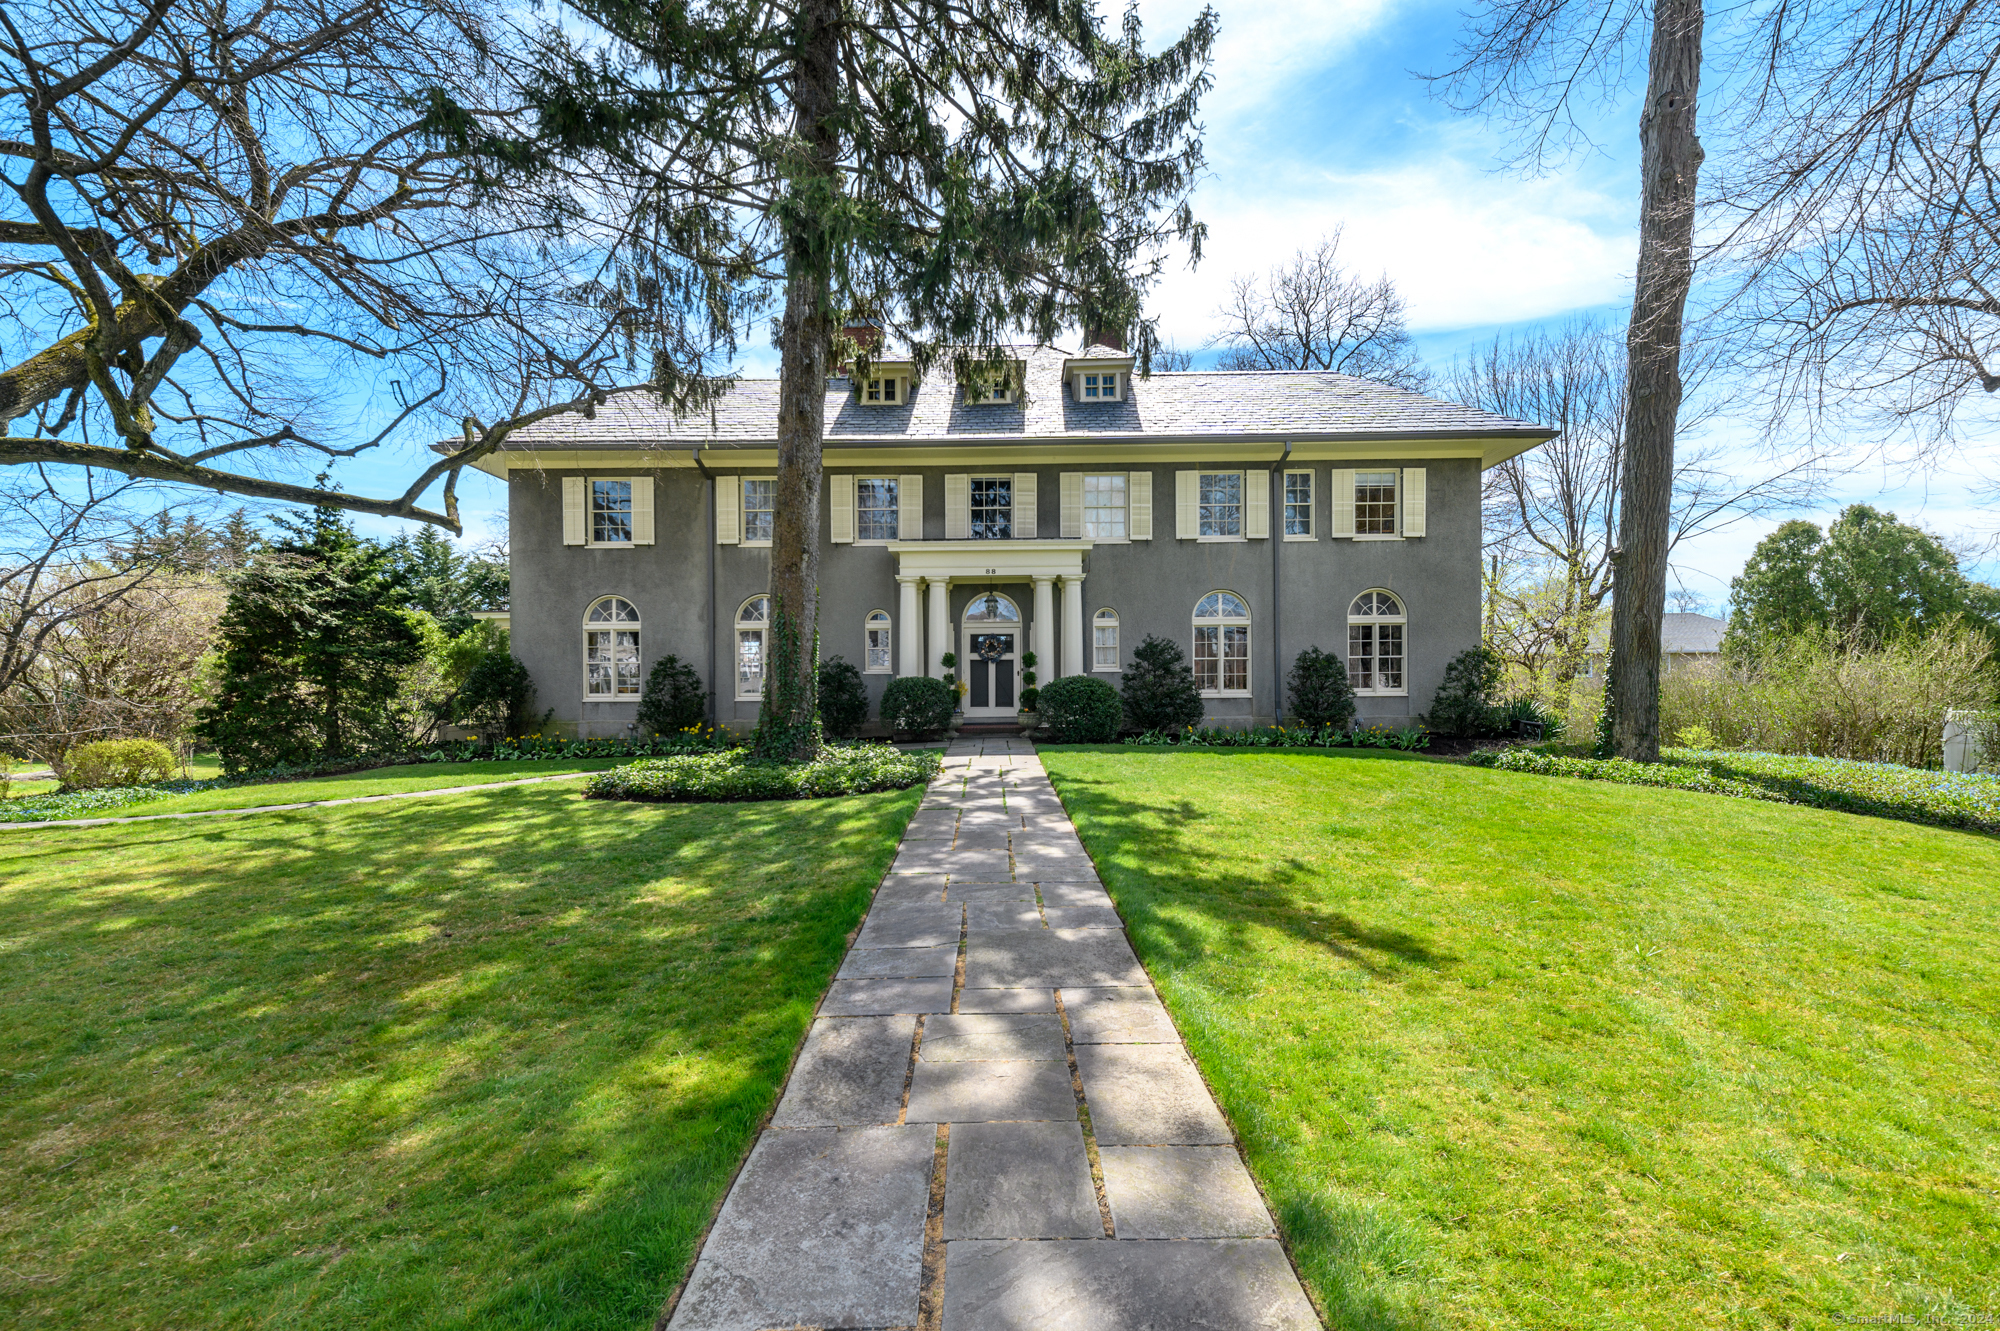 This is a rare opportunity to own one of the original grand homes of Shippan Point in Stamford, CT. This stately 7-bedroom Georgian colonial is located near the tip of the peninsula and has a magical soul. The drive to this impressive property will bring you back in time. It features an original wood staircase that spirals from the first floor to the third floor. The house has a slate roof, 3 fireplaces, and is on nearly an acre of flat land. The first floor has impressive Palladian windows throughout and has breathtaking water views from all three levels. The peace and tranquility of this prestigious property are beyond compare. Walk out through french doors on the first level onto a fairytale covered porch and gaze out through majestic columns to a vista of the Long Island Sound. The living room and dining room both have fireplaces and are perfect for entertaining. The primary bedroom has a fireplace, full bath, and french doors that lead out to a magnificent balcony with views of Long Island and Greenwich. This gracious home has ten-foot ceilings, yet it is still warm and intimate and might just be the perfect home for you. The basement has an additional 800 square feet of finished heated living space plus storage and walk out to manicured backyard. Close to train station, vibrant downtown Stamford, 3 public beaches and Chelsea Piers. Please note the number on the house is 88.